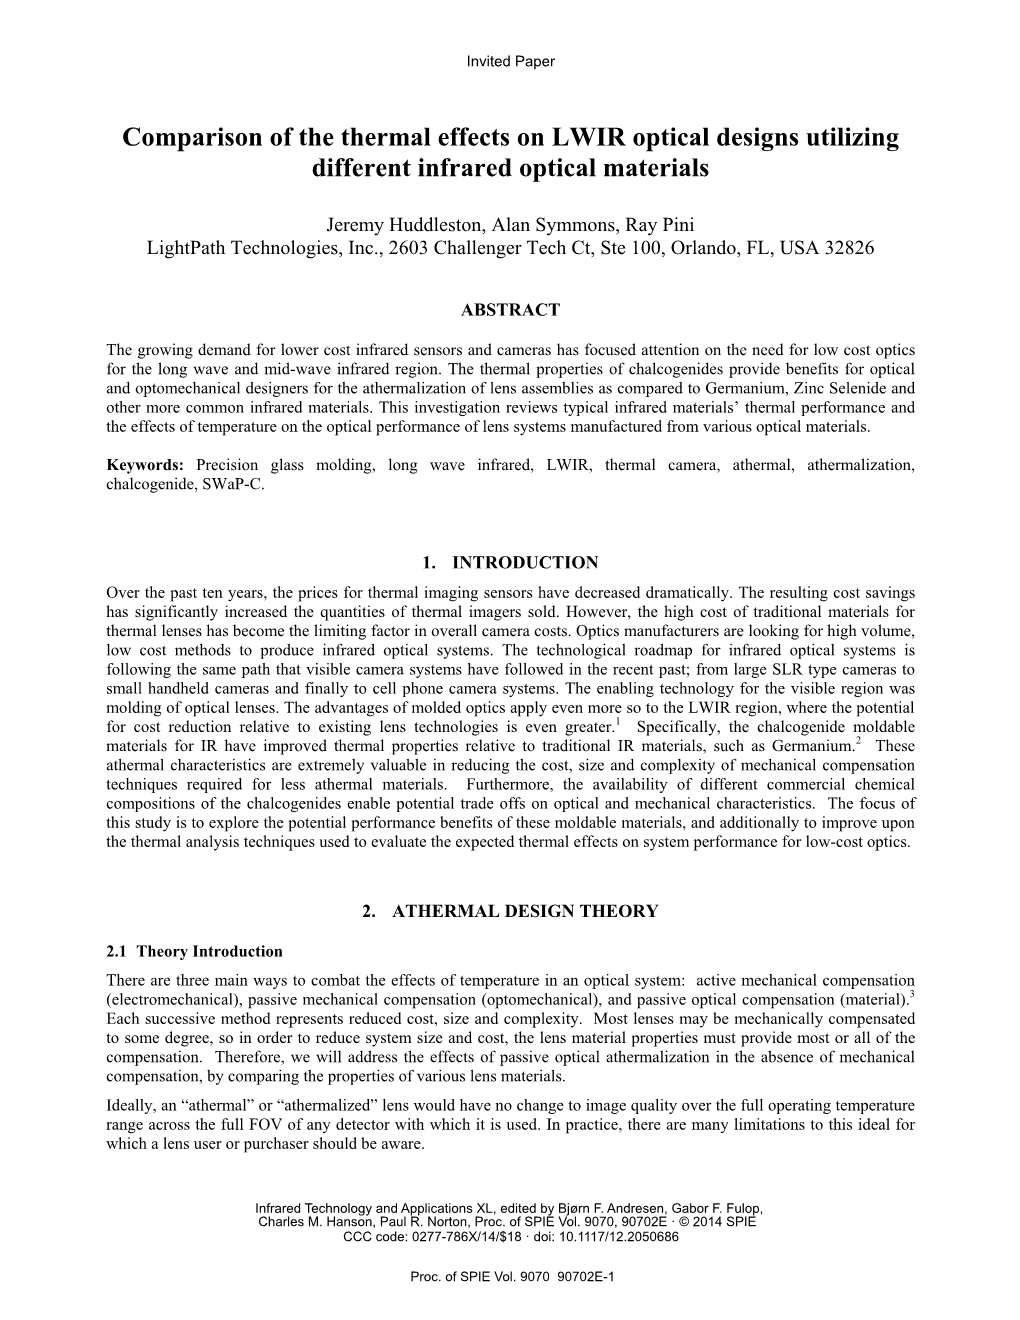 Comparison of the Thermal Effects on LWIR Optical Designs Utilizing Different Infrared Optical Materials